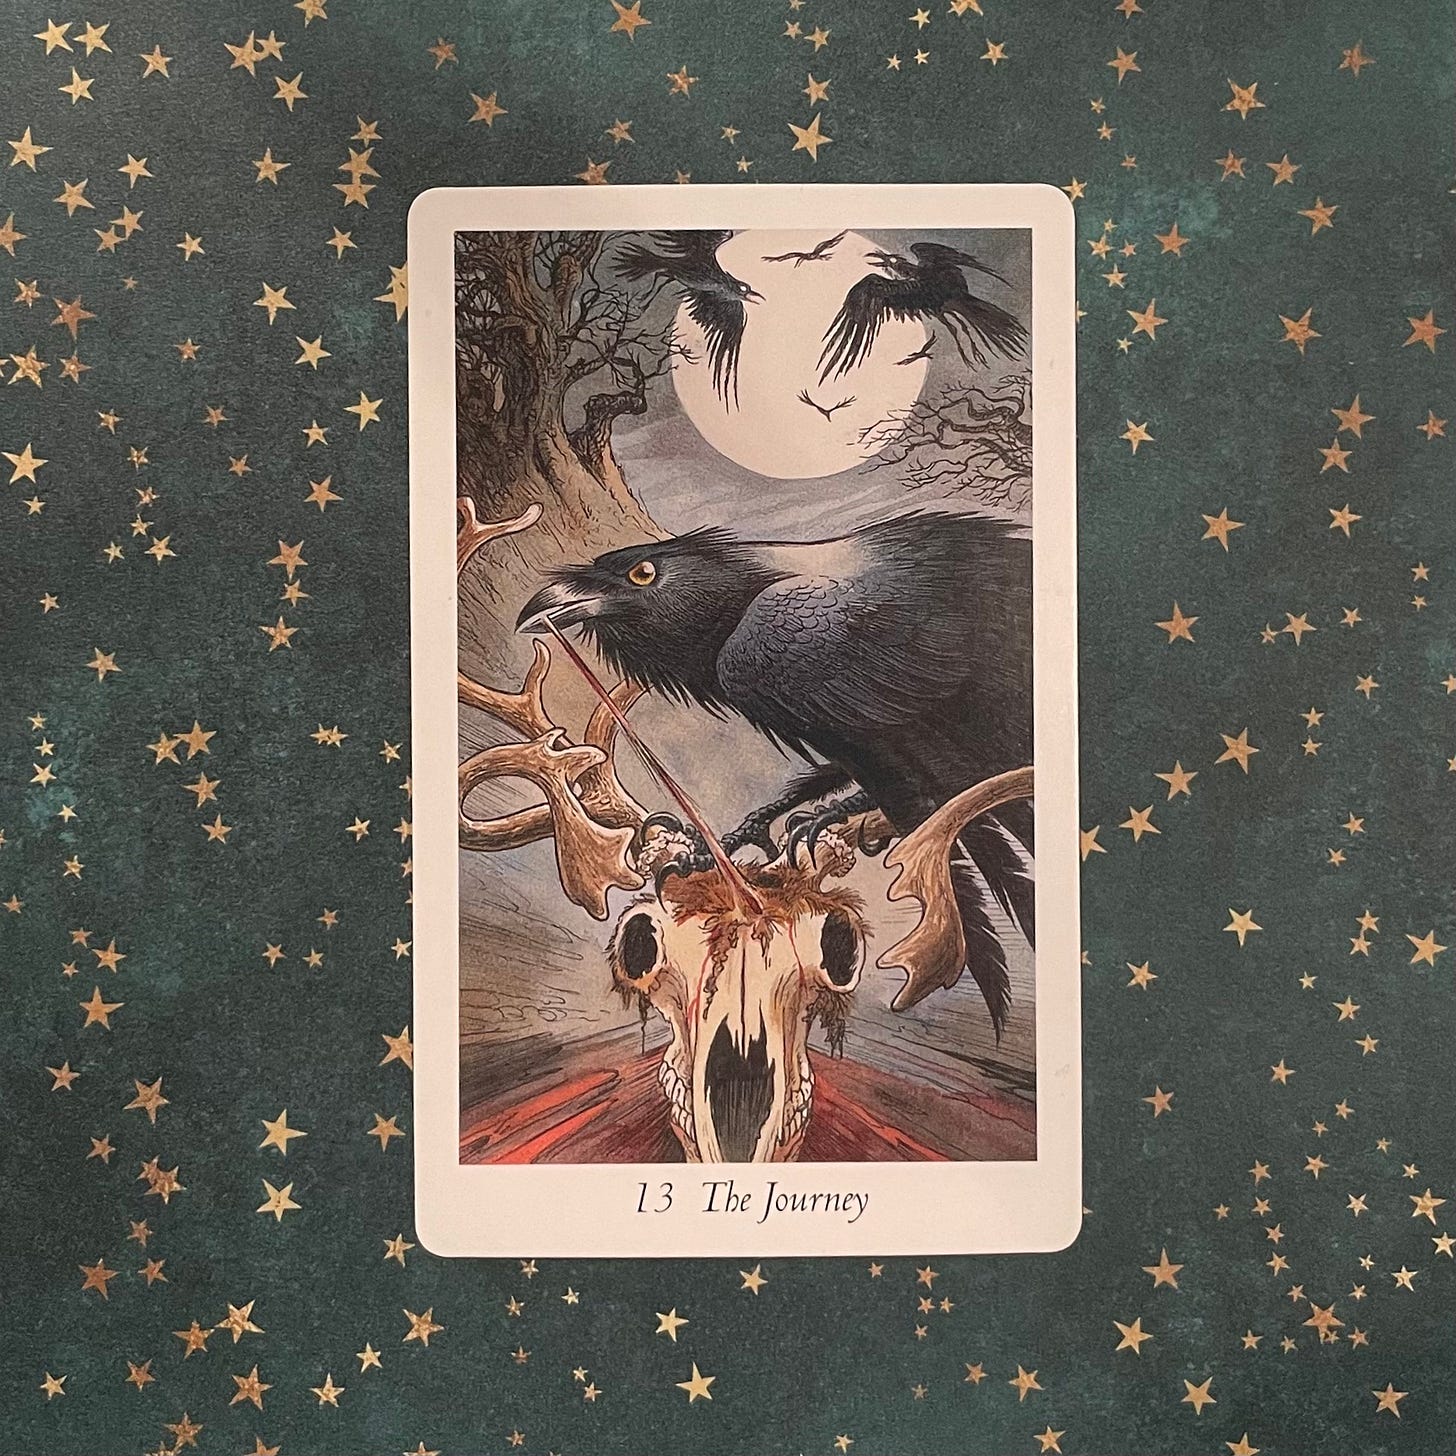 Photo of a tarot card on a dark green cloth covered in tiny gold stars. The card is hand drawn and pictures a crow standing on the skull of a stag pulling one of the remaining bits of flesh off. Behind it there is a full moon, some bare trees and four other airborne crows. There is a distinct aura of menace about the card.